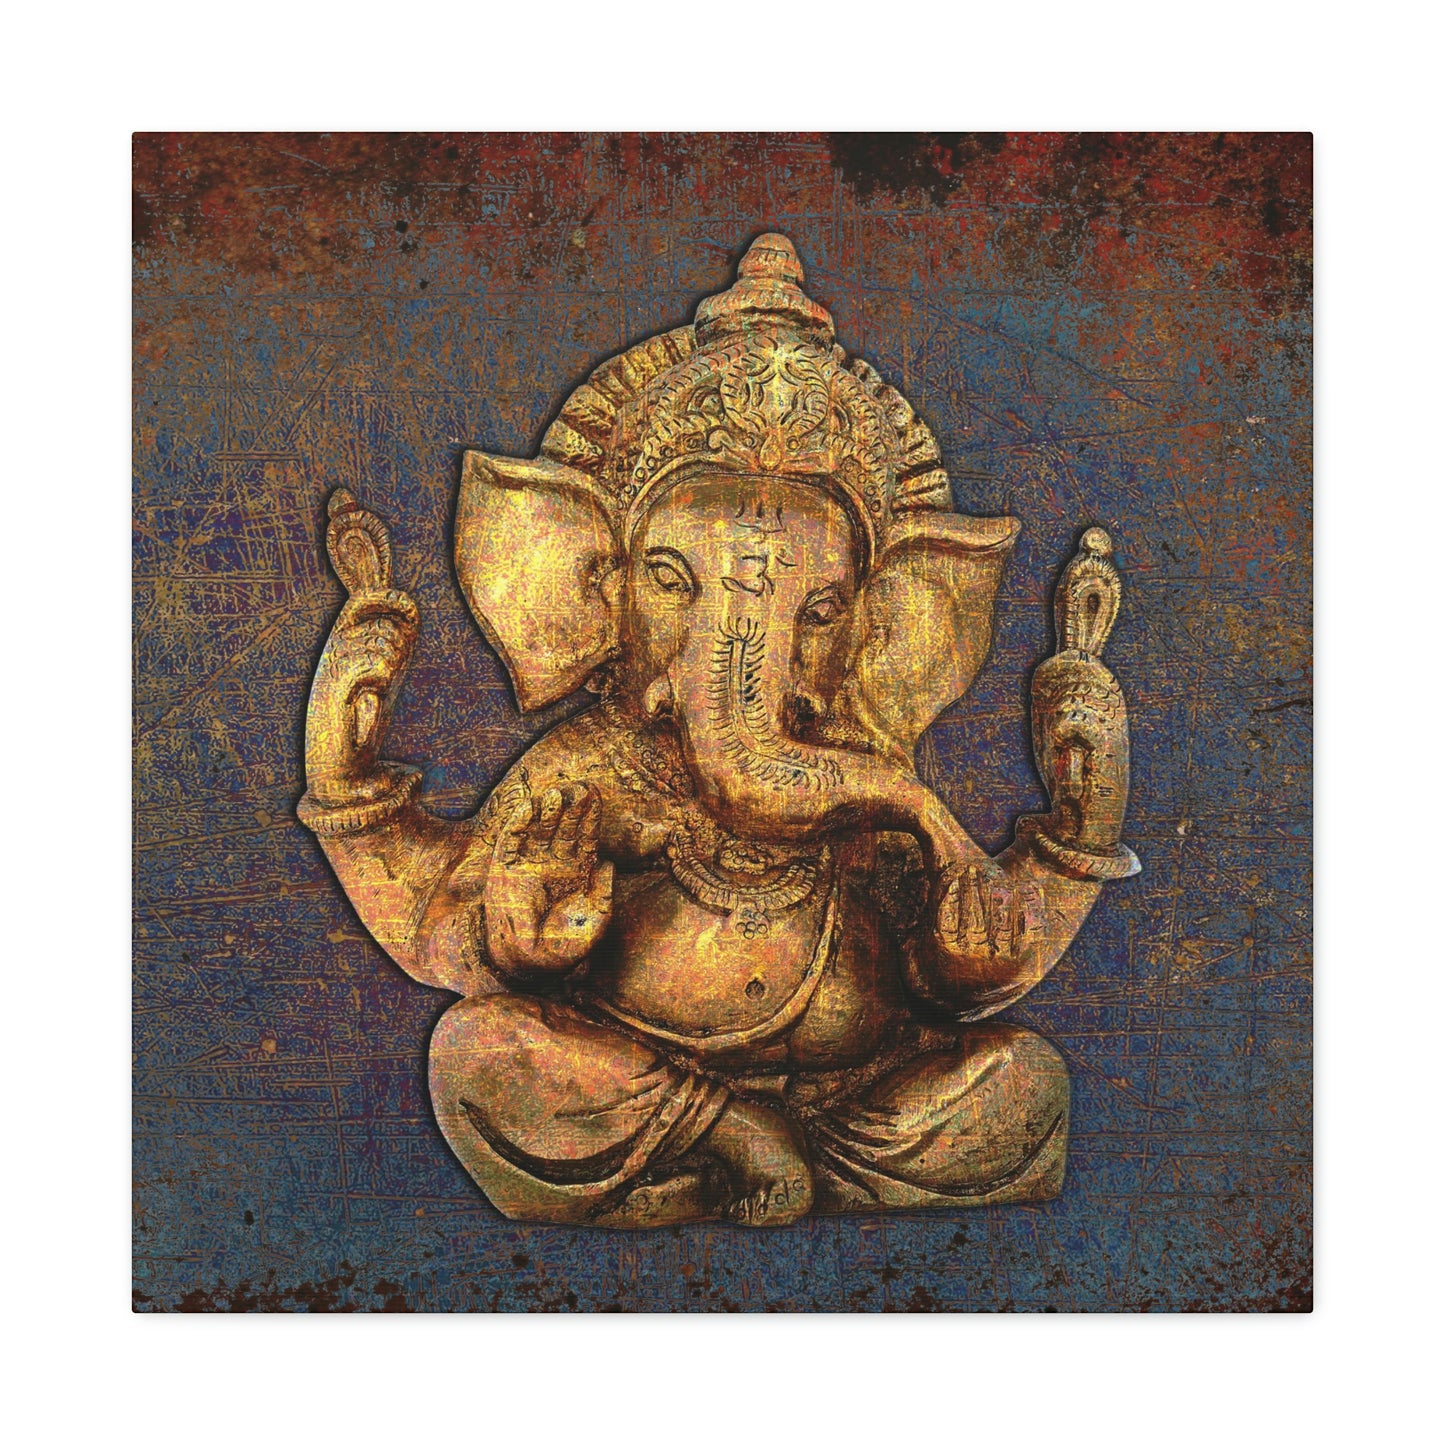 Ganesha on a Distressed Purple and Orange Background Printed on Unframed Stretched Canvas 5 sizes available